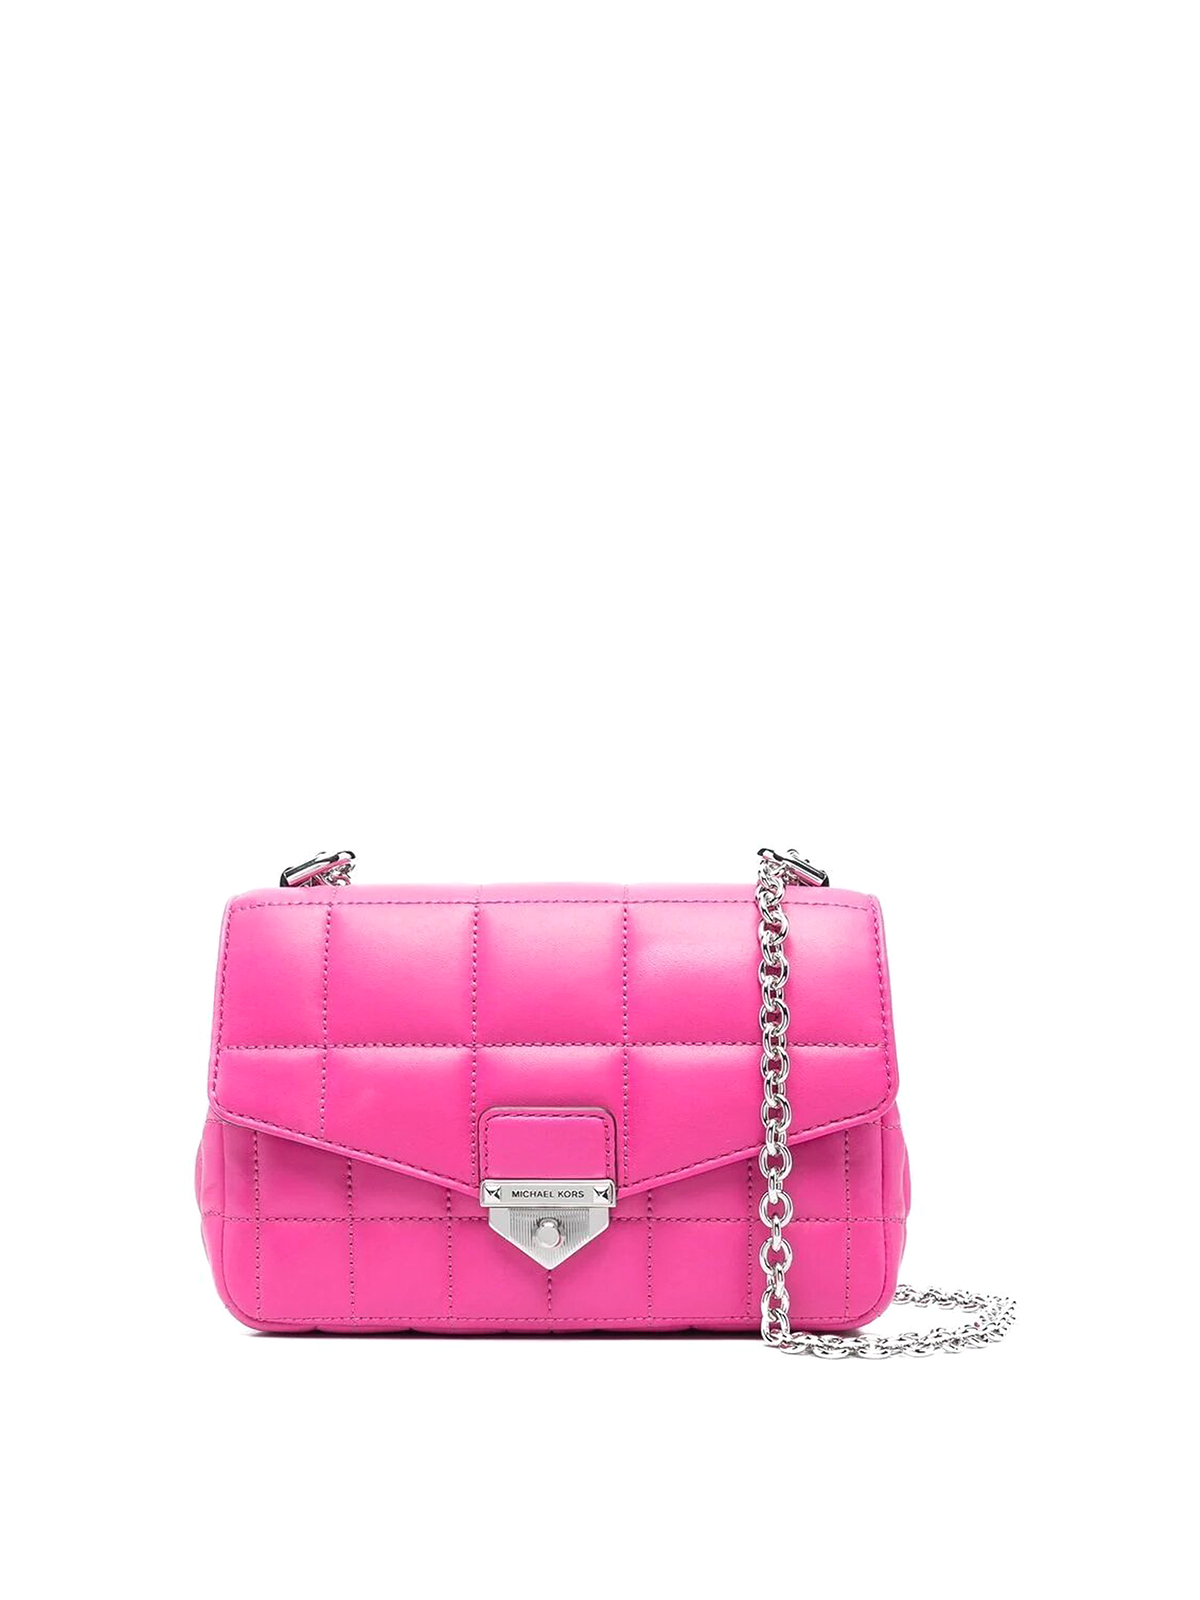 Michael Kors, Bags, New Michael Kors Pink Quilted Leather Chain Bag